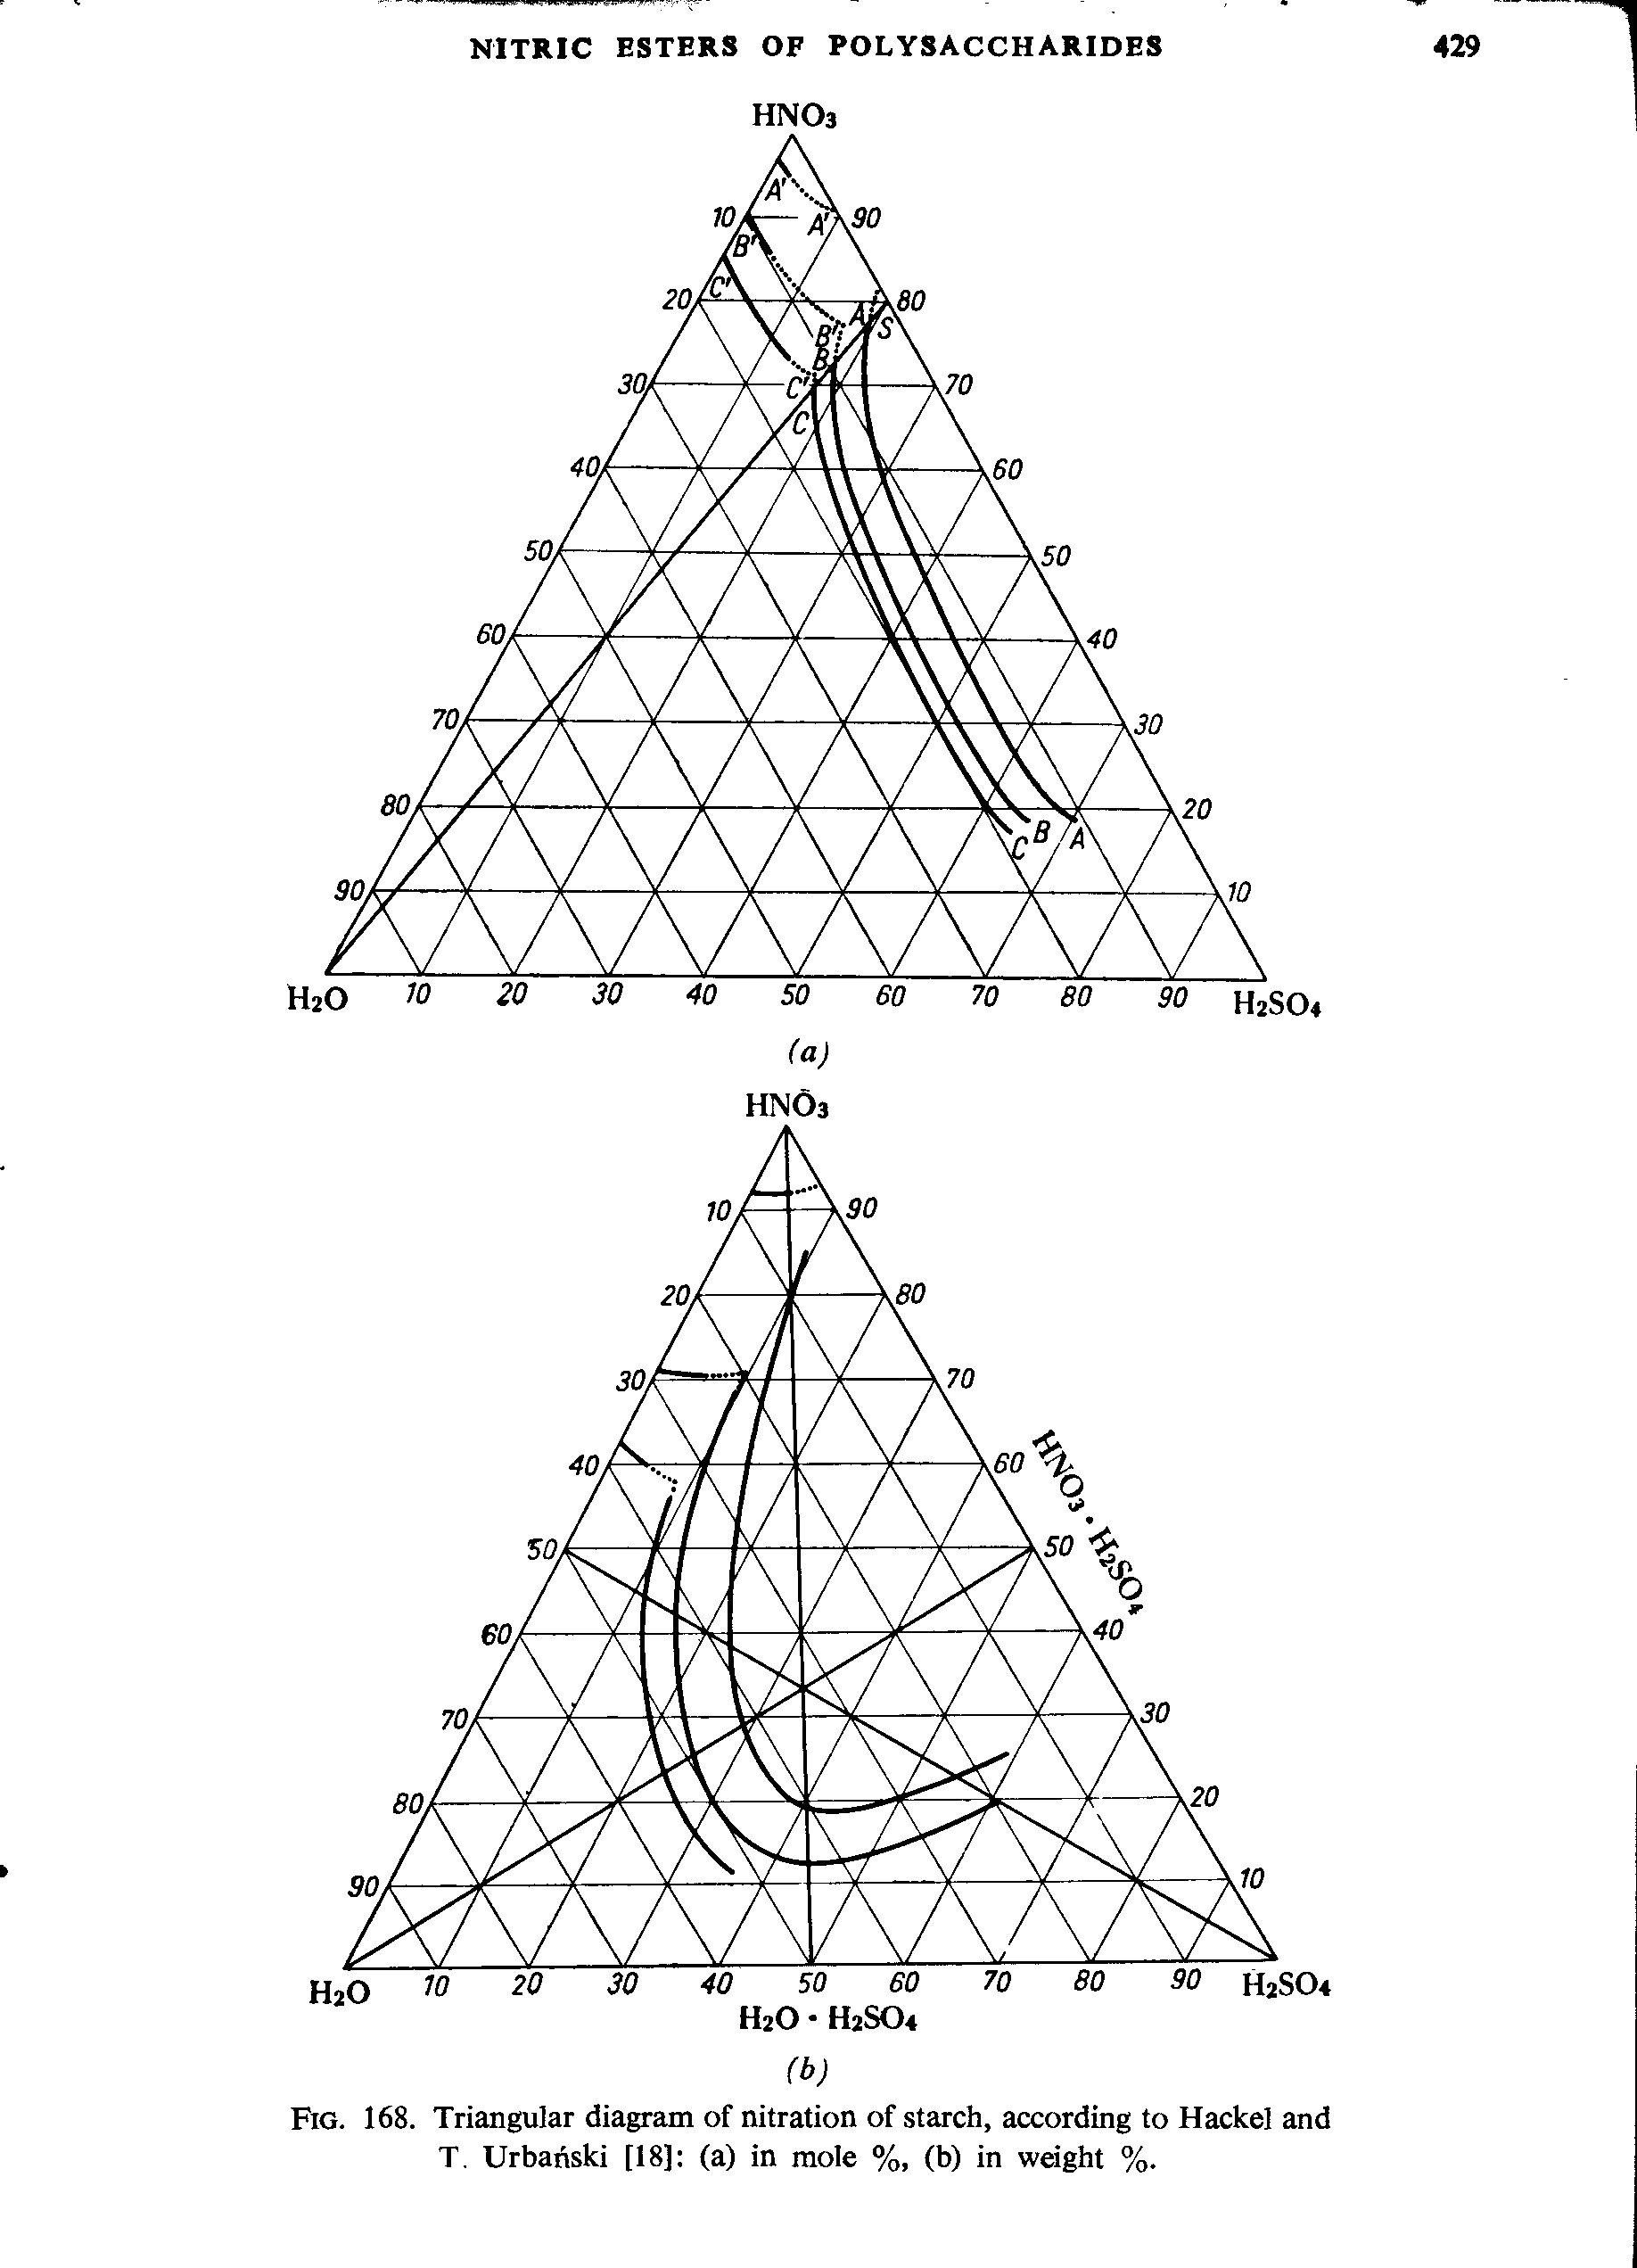 Fig. 168. Triangular diagram of nitration of starch, according to Hackel and T. Urbanski [18] (a) in mole %, (b) in weight %.